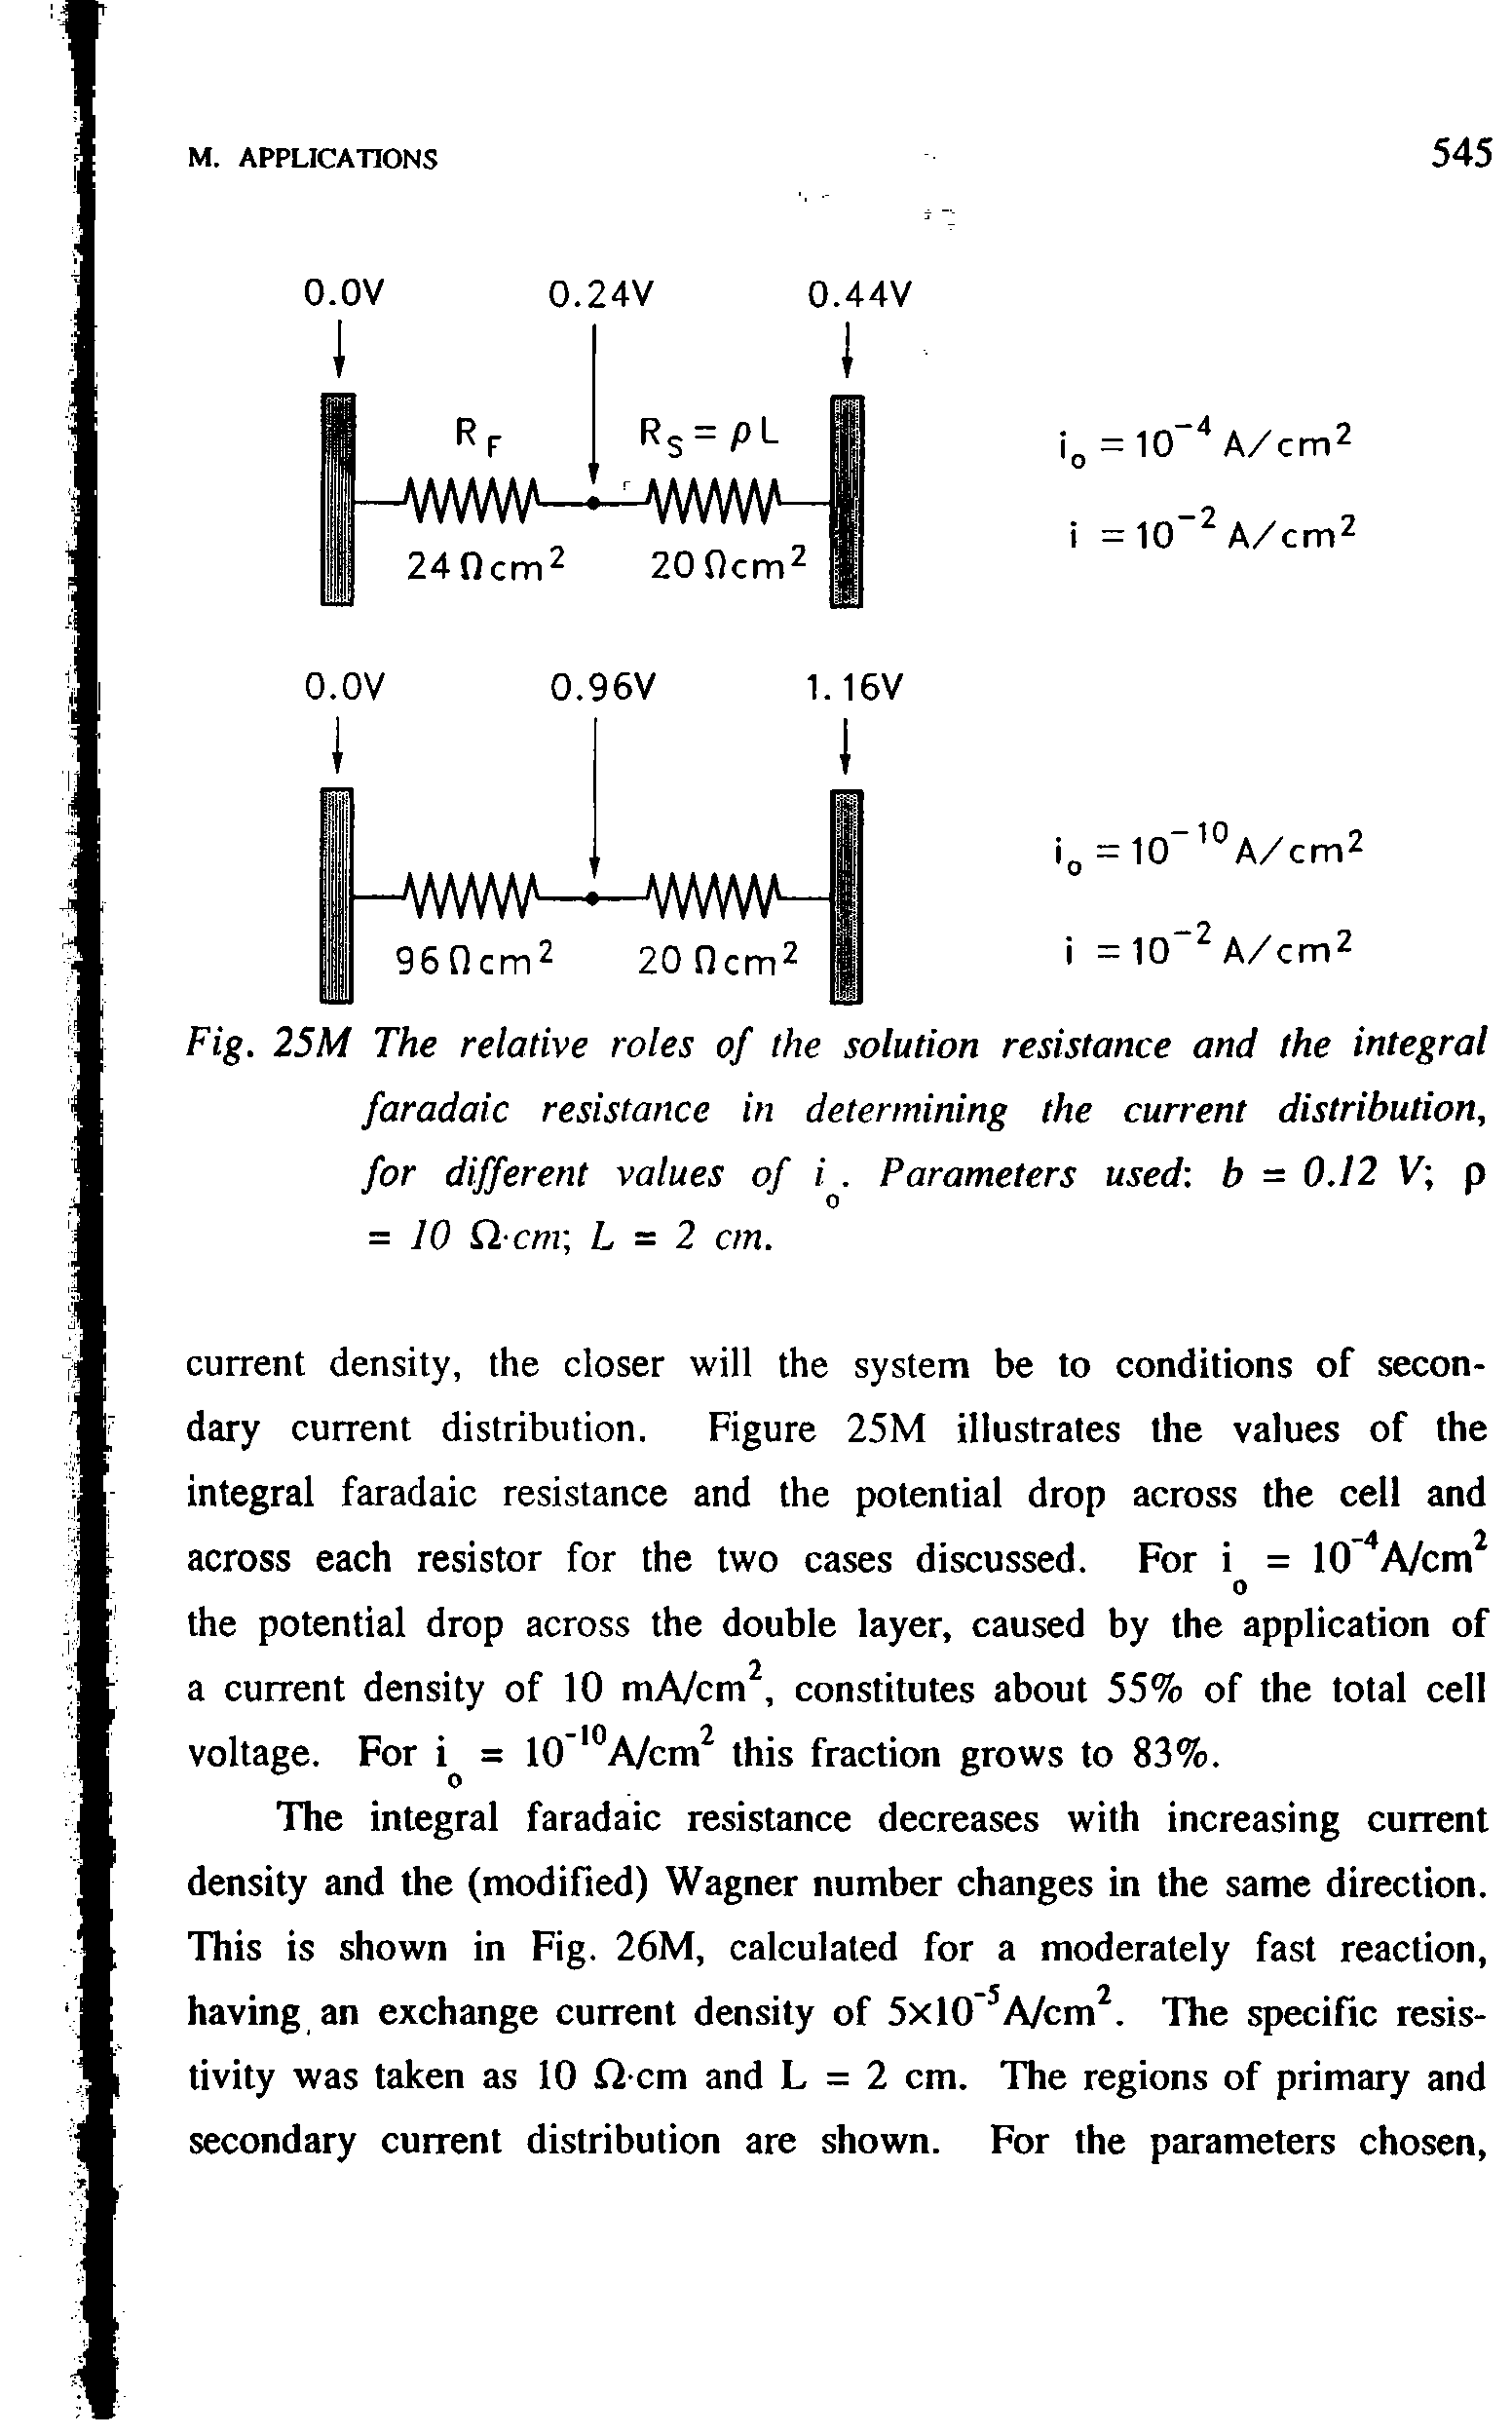 Fig. 25M The relative roles of the solution resistance and the integral faradaic resistance in determining the current distribution, for different values of i. Parameters used b = 0.12 V p = 10 Q. cm L = 2 cm.